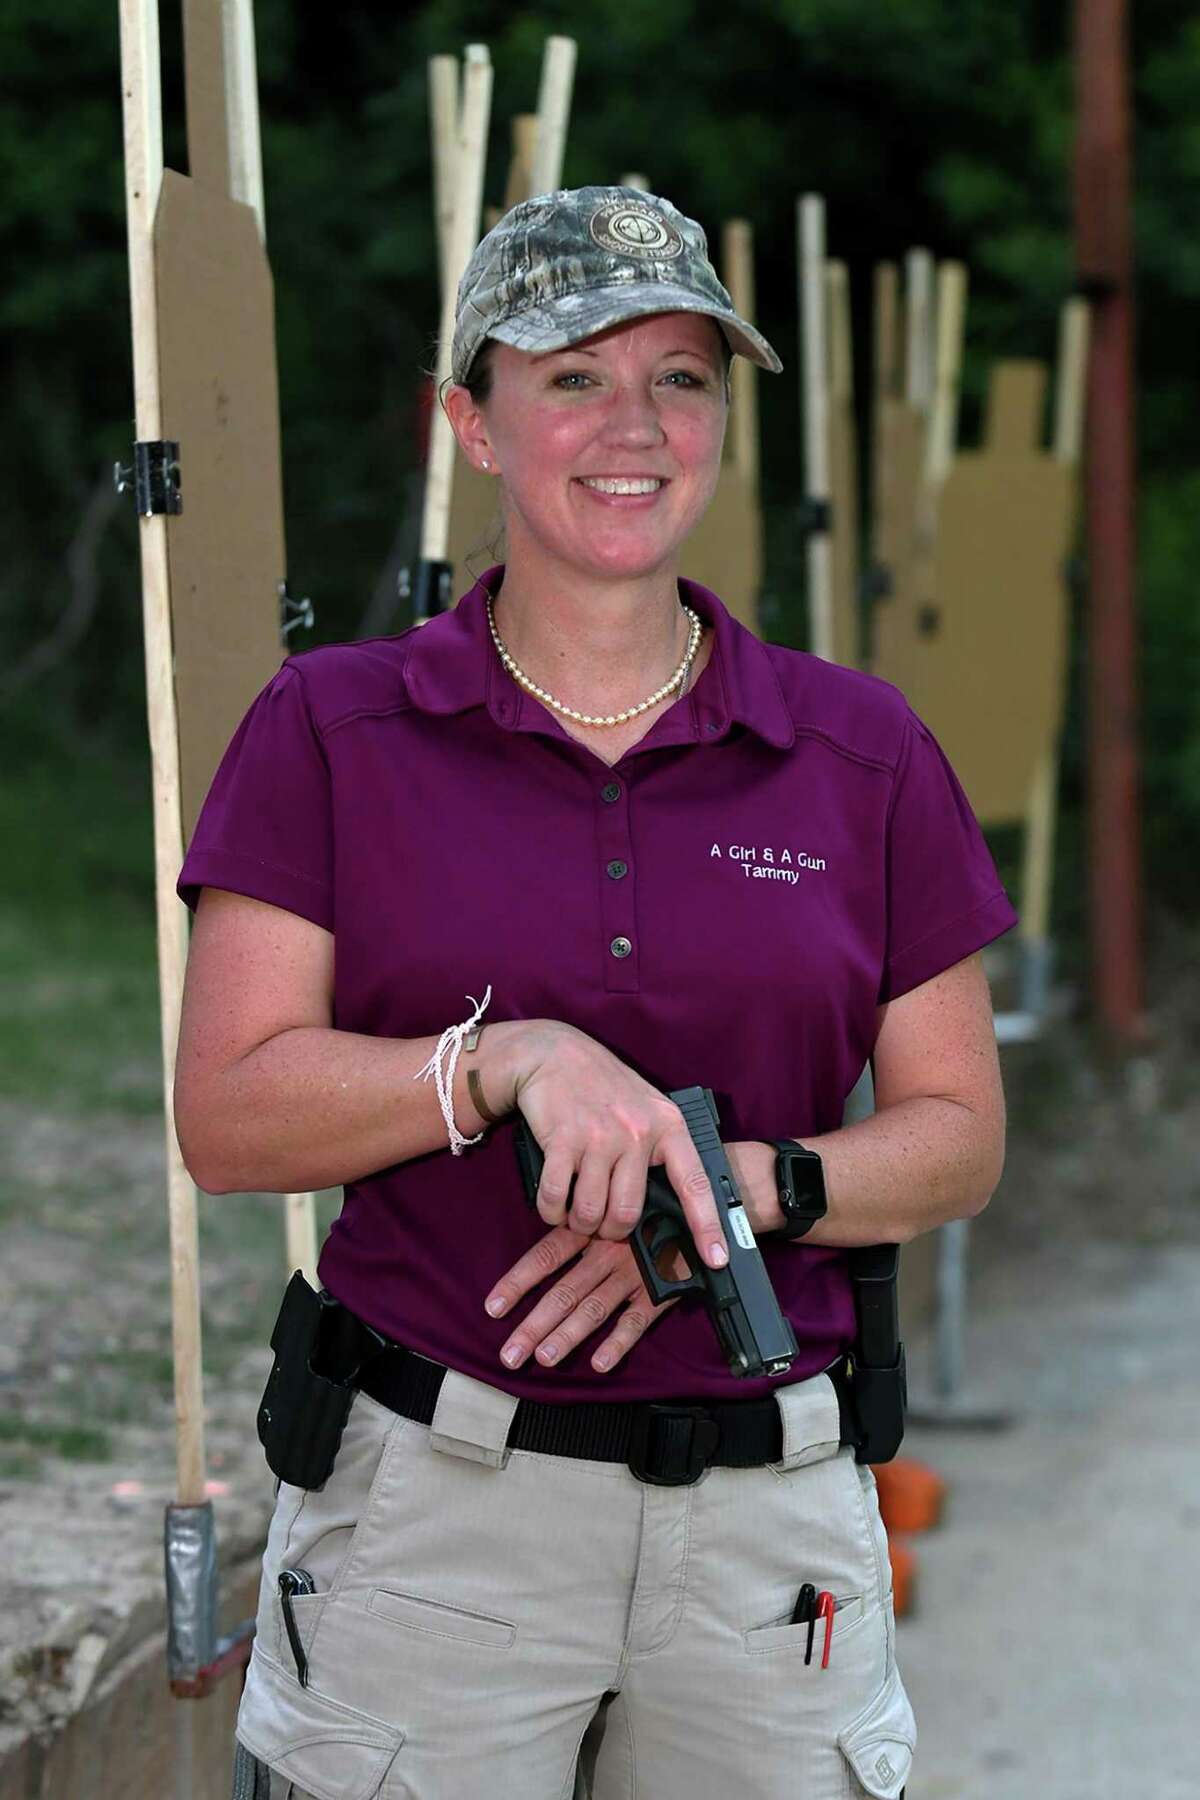 Tammy Hunter is the Cypress chapter leader for "A Girl and a Gun" women's shooting social group which practices at Hot Wells Shooting Range in Cypress. (Jerry Baker/For the Chronicle)